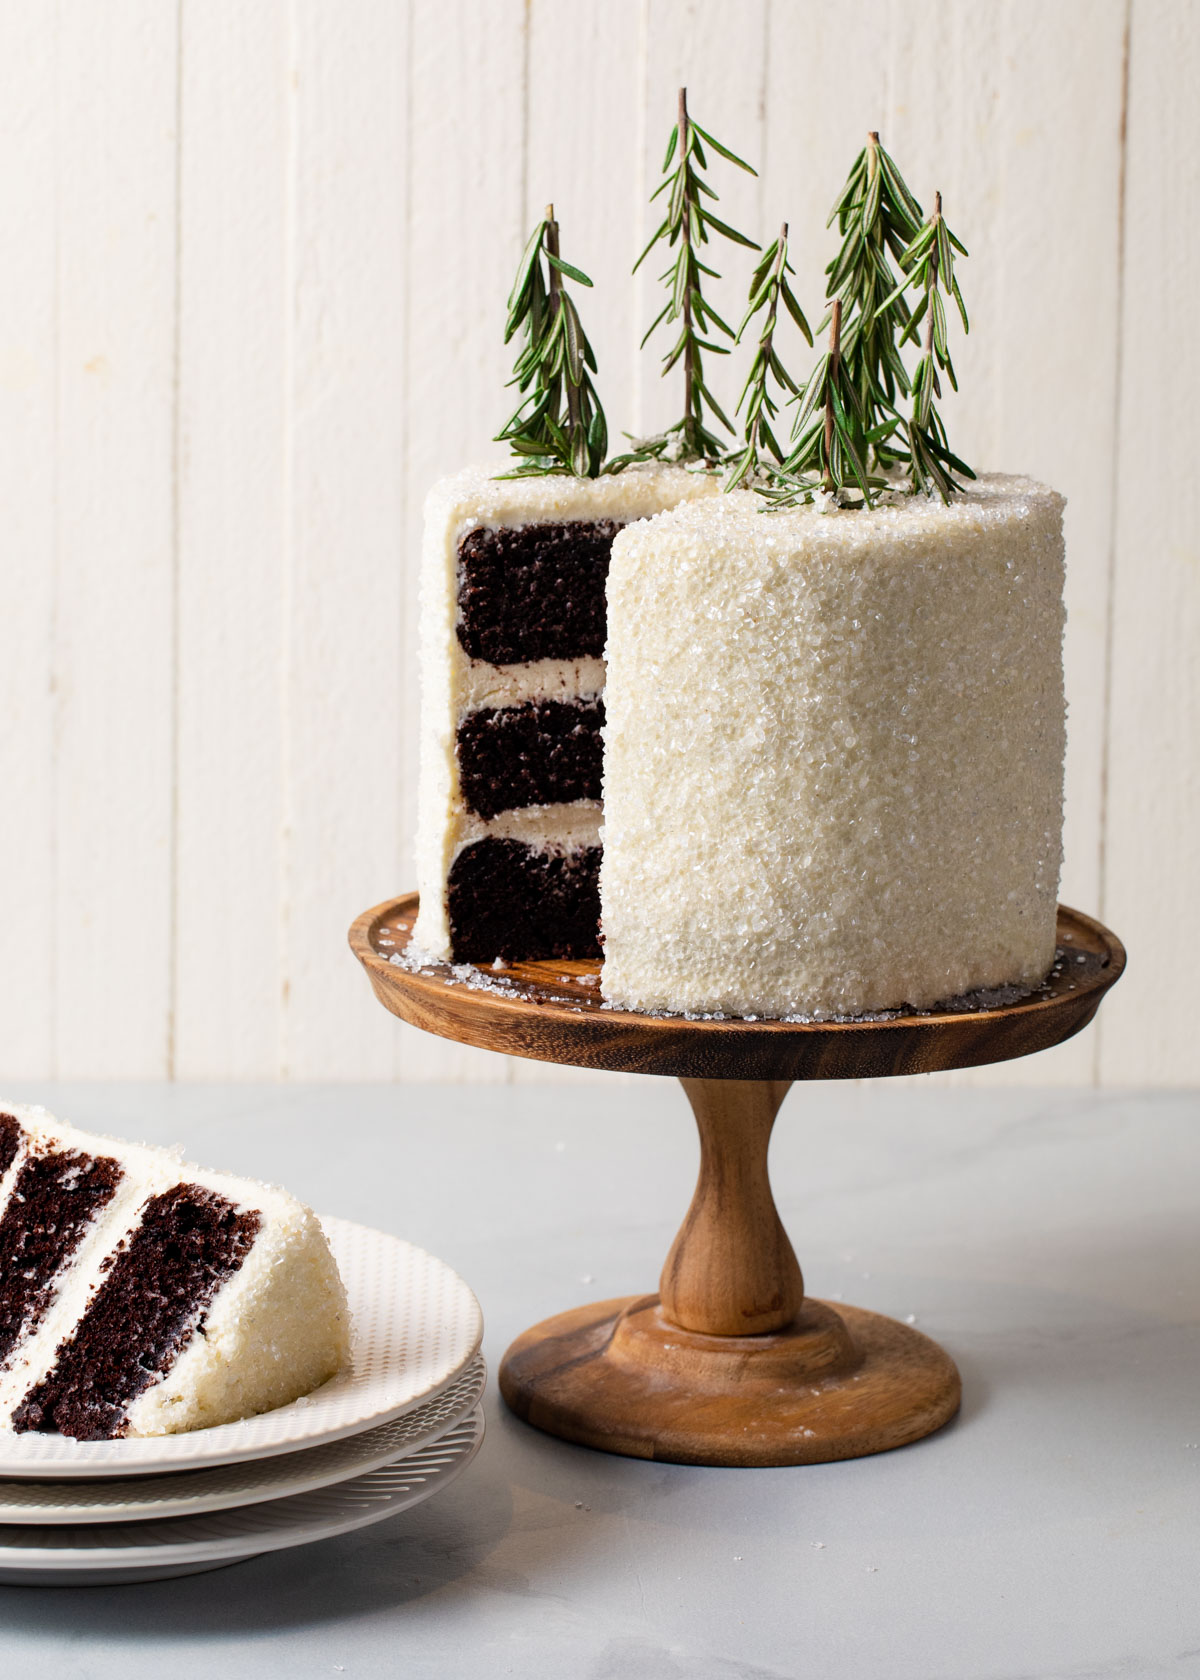 A chocolate layer cake with peppermint buttercream and rosemary trees on top